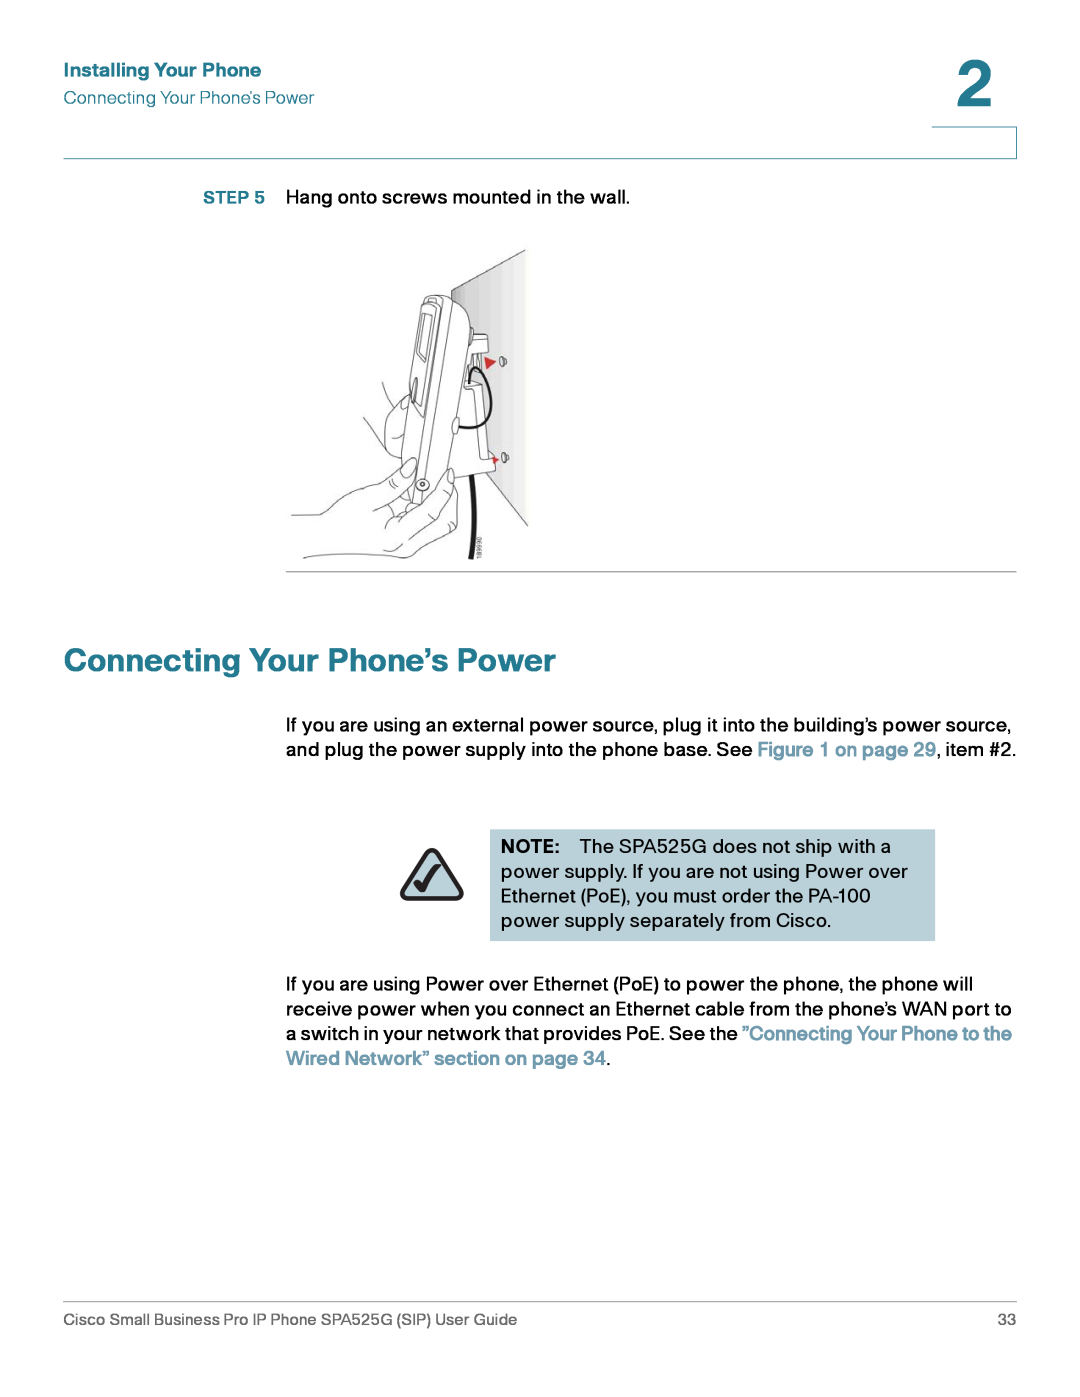 Cisco Systems SPA525G manual Connecting Your Phone’s Power, Installing Your Phone 